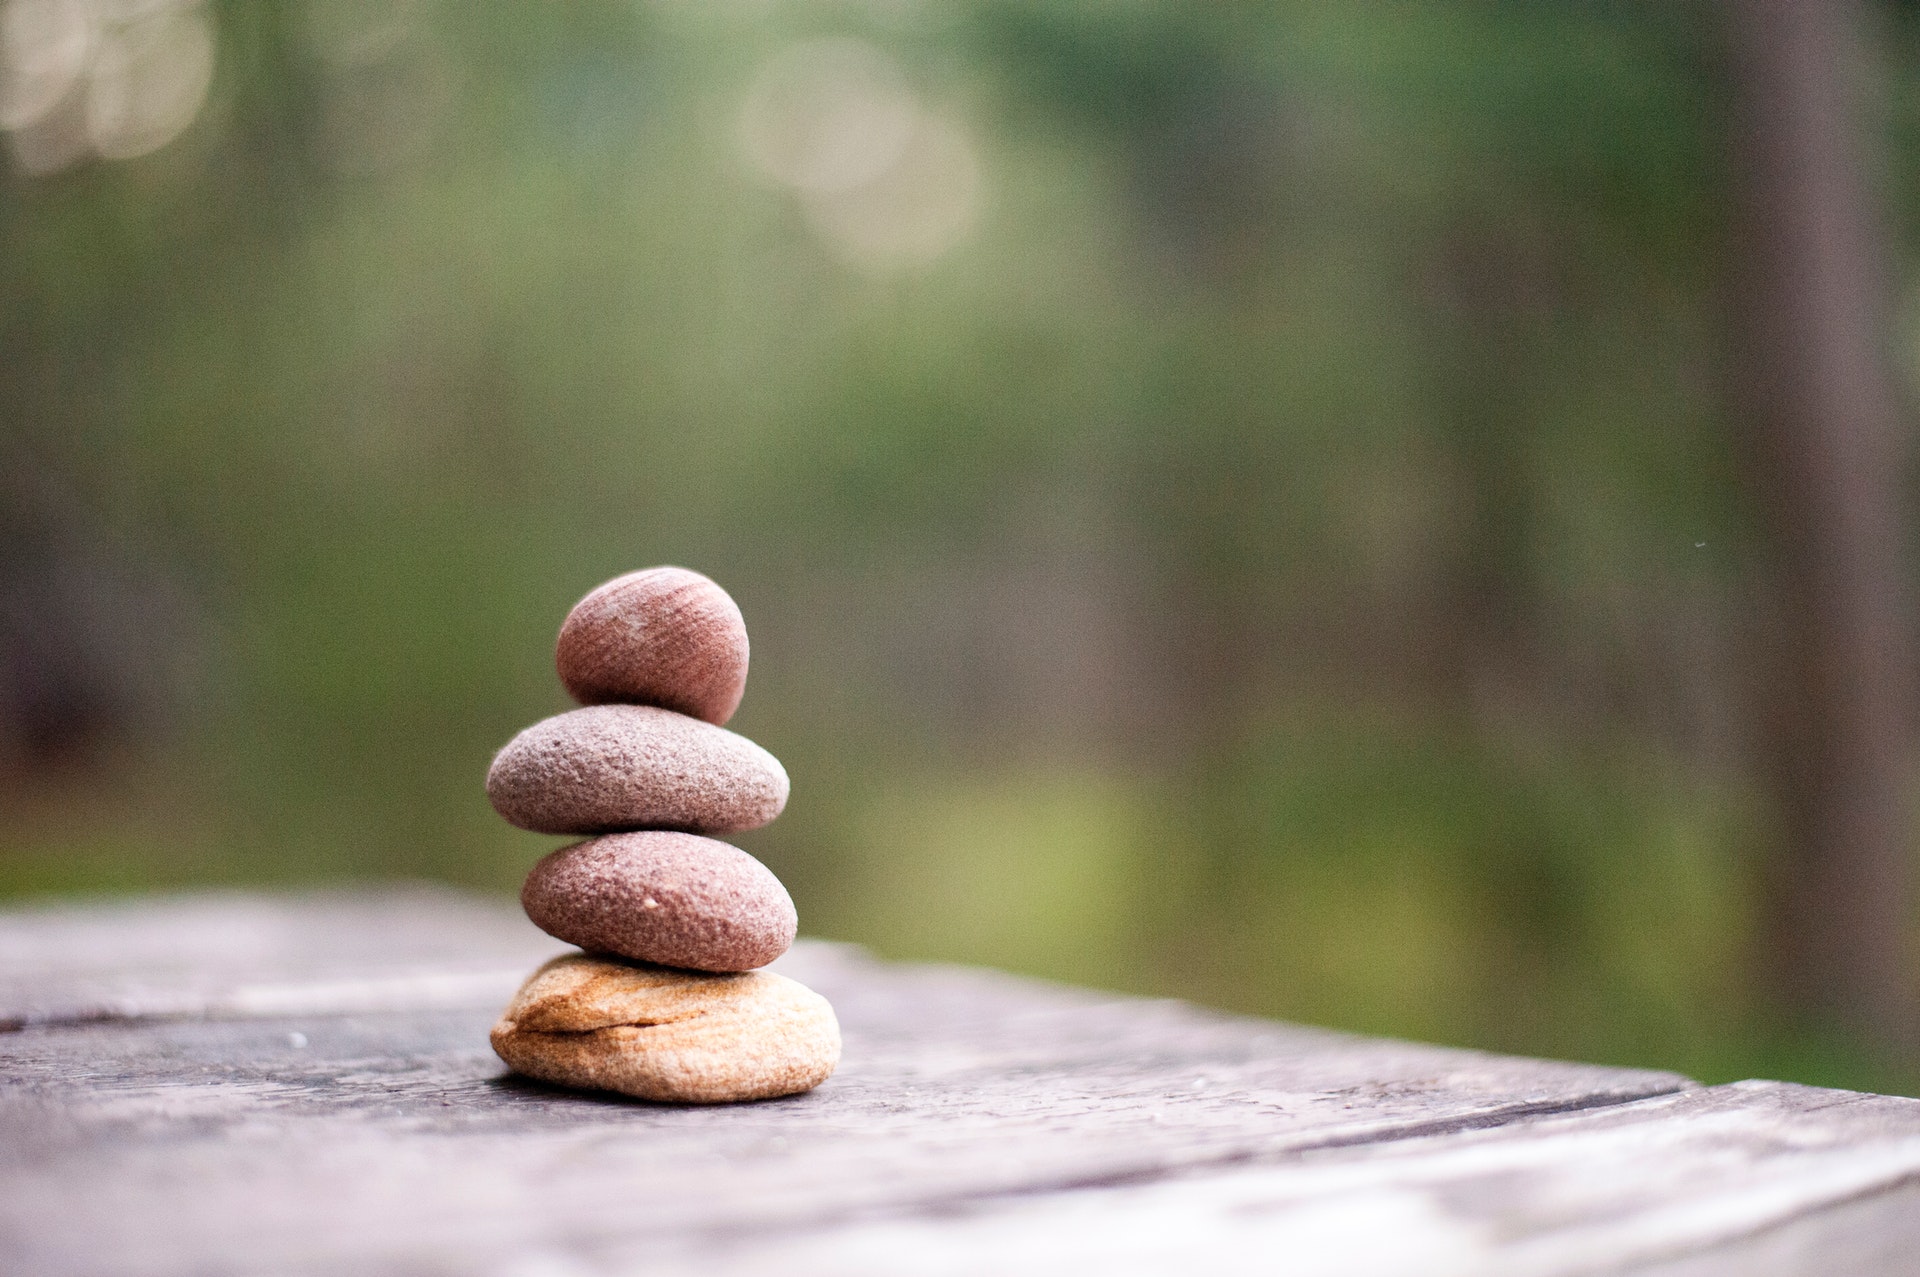 Pebbles stacked up - How to find inner peace